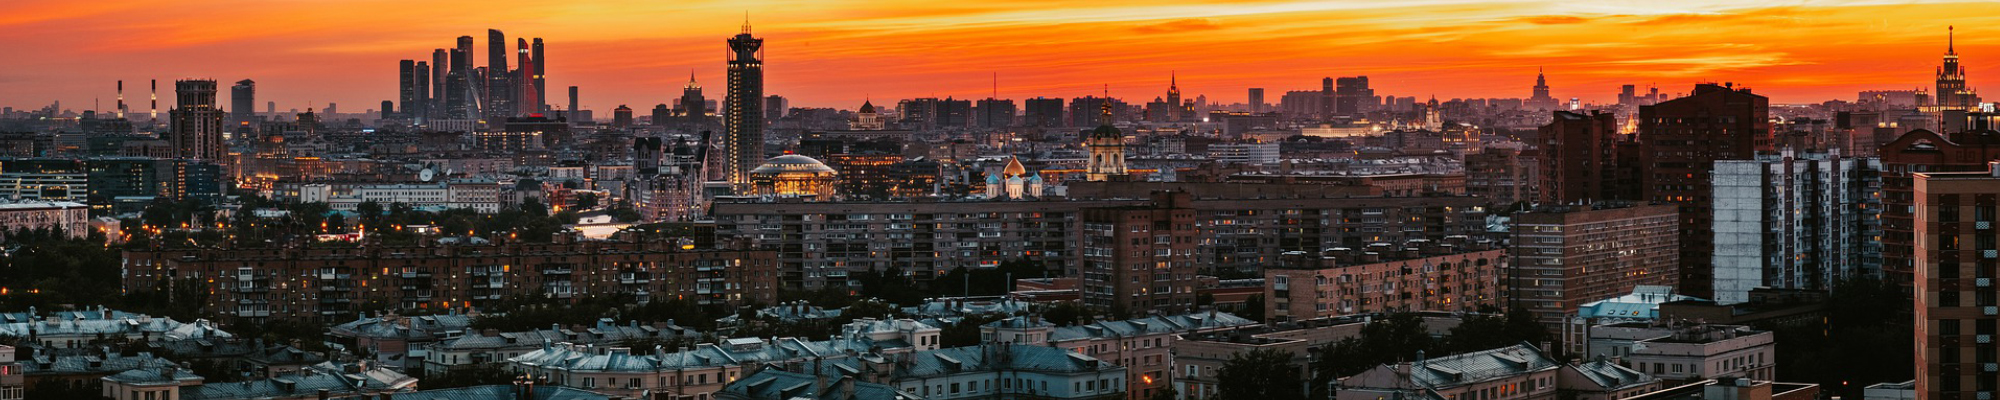 Moscow city view at dusk